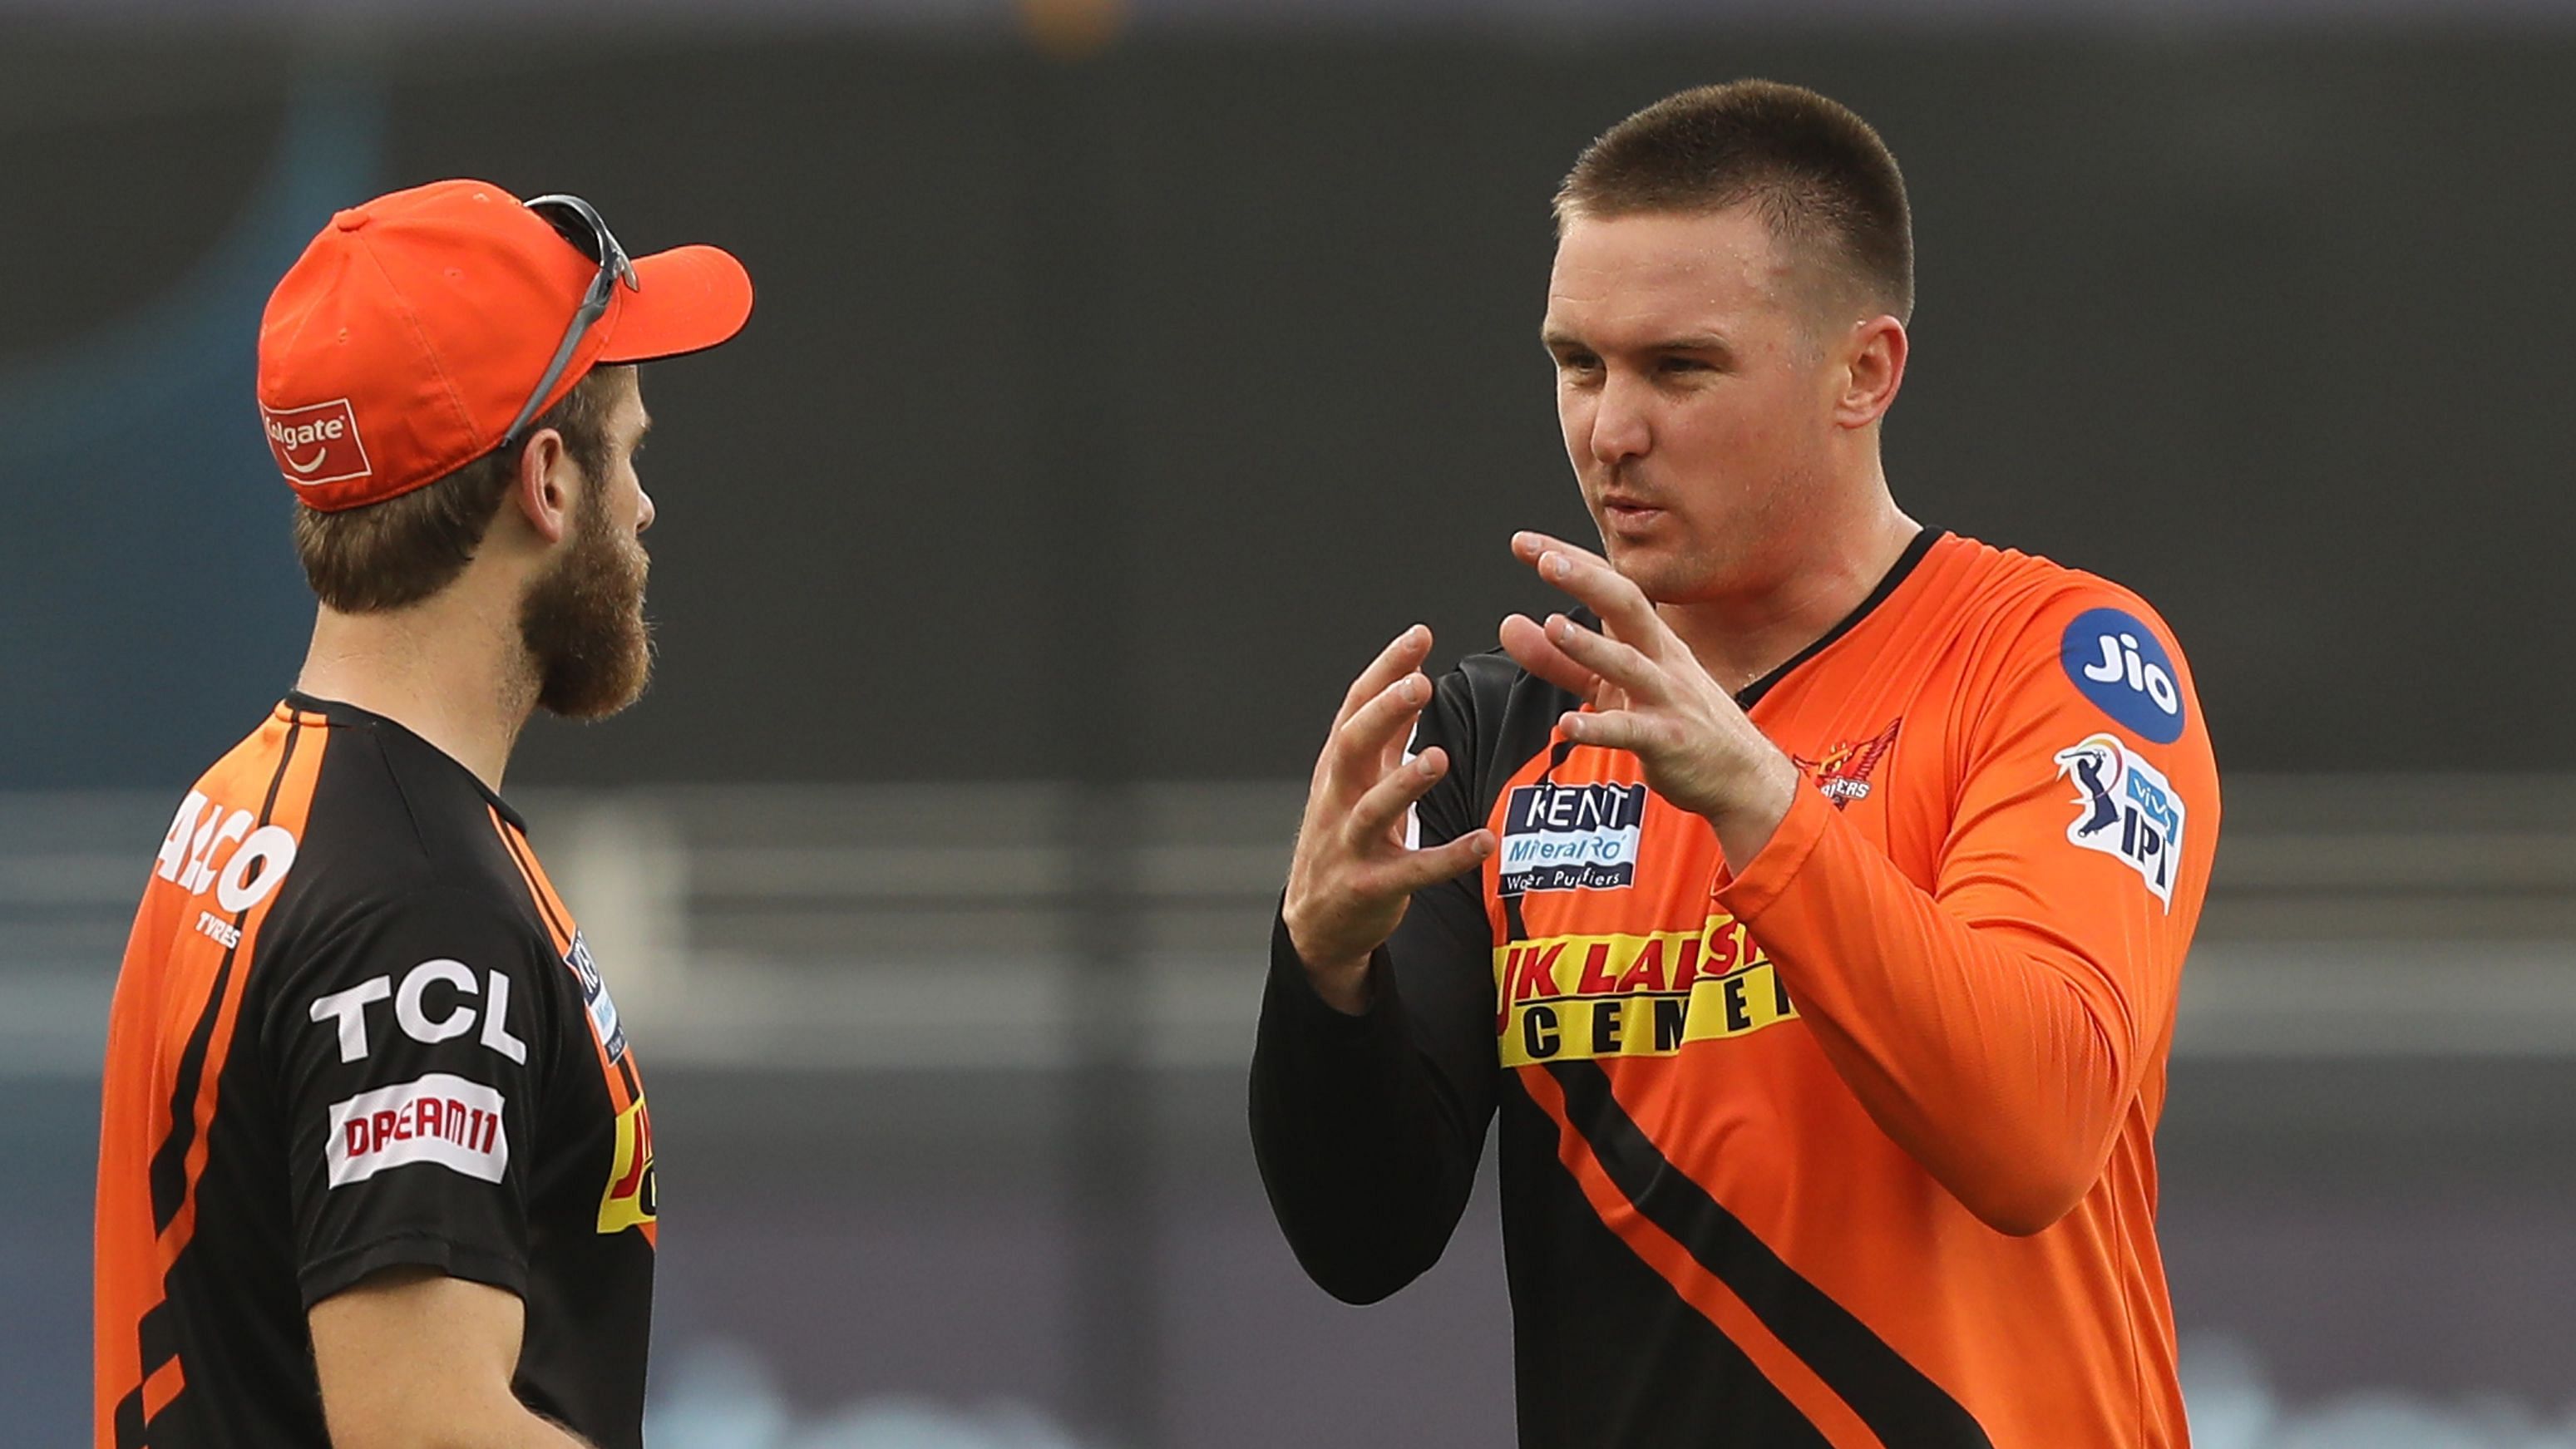 Jason Roy regrets beating his hand after drops Dhoni's catch